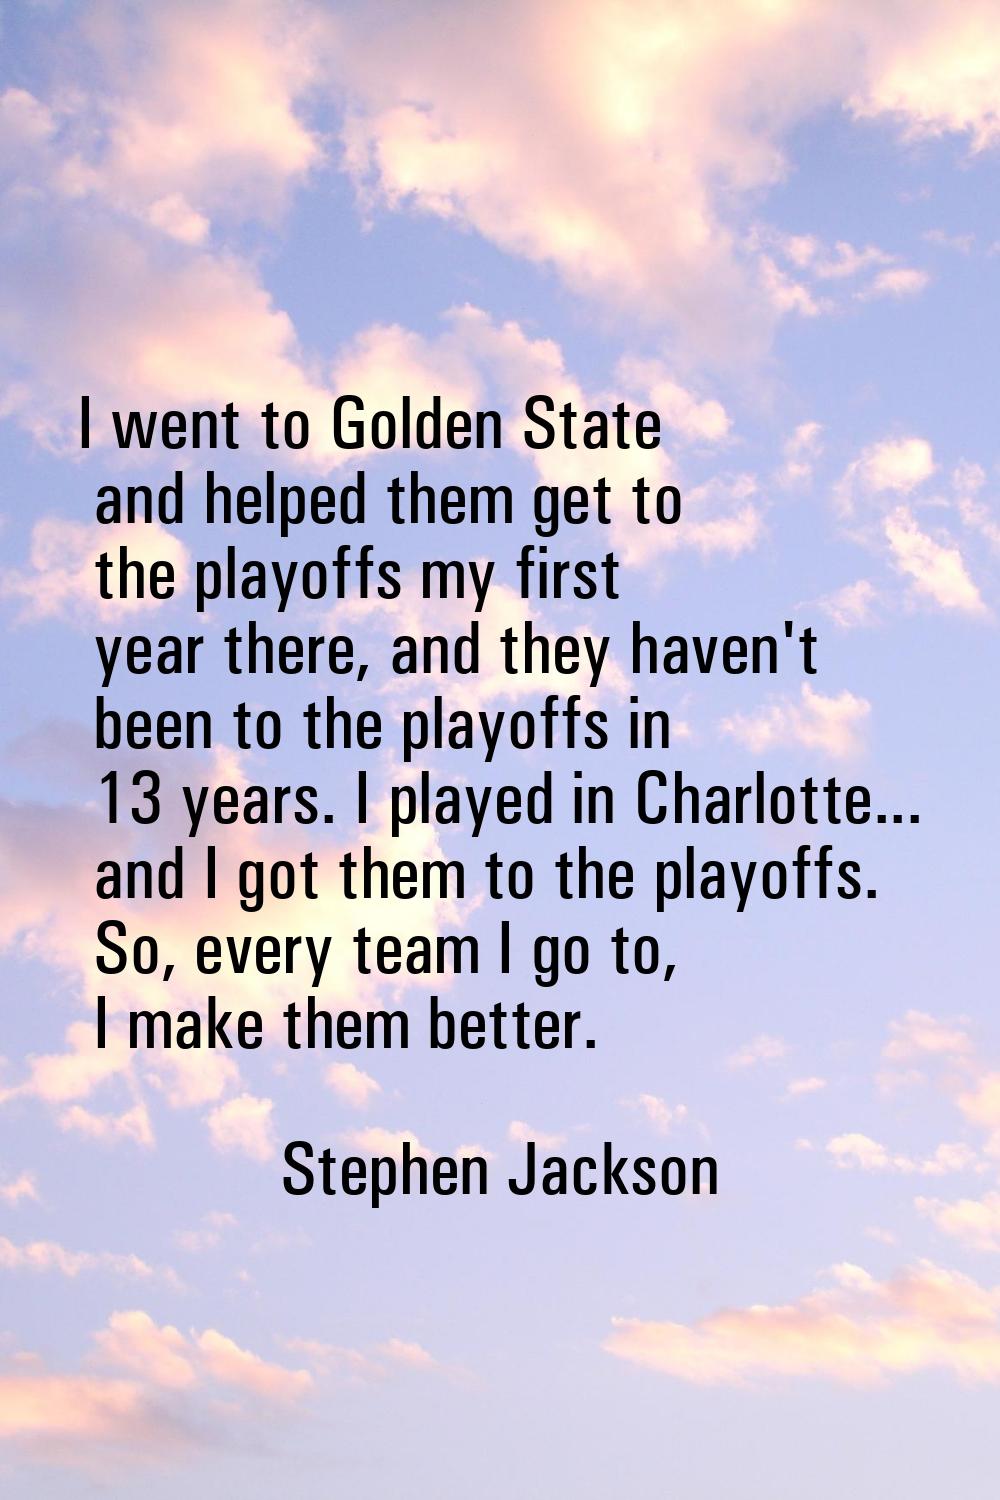 I went to Golden State and helped them get to the playoffs my first year there, and they haven't be